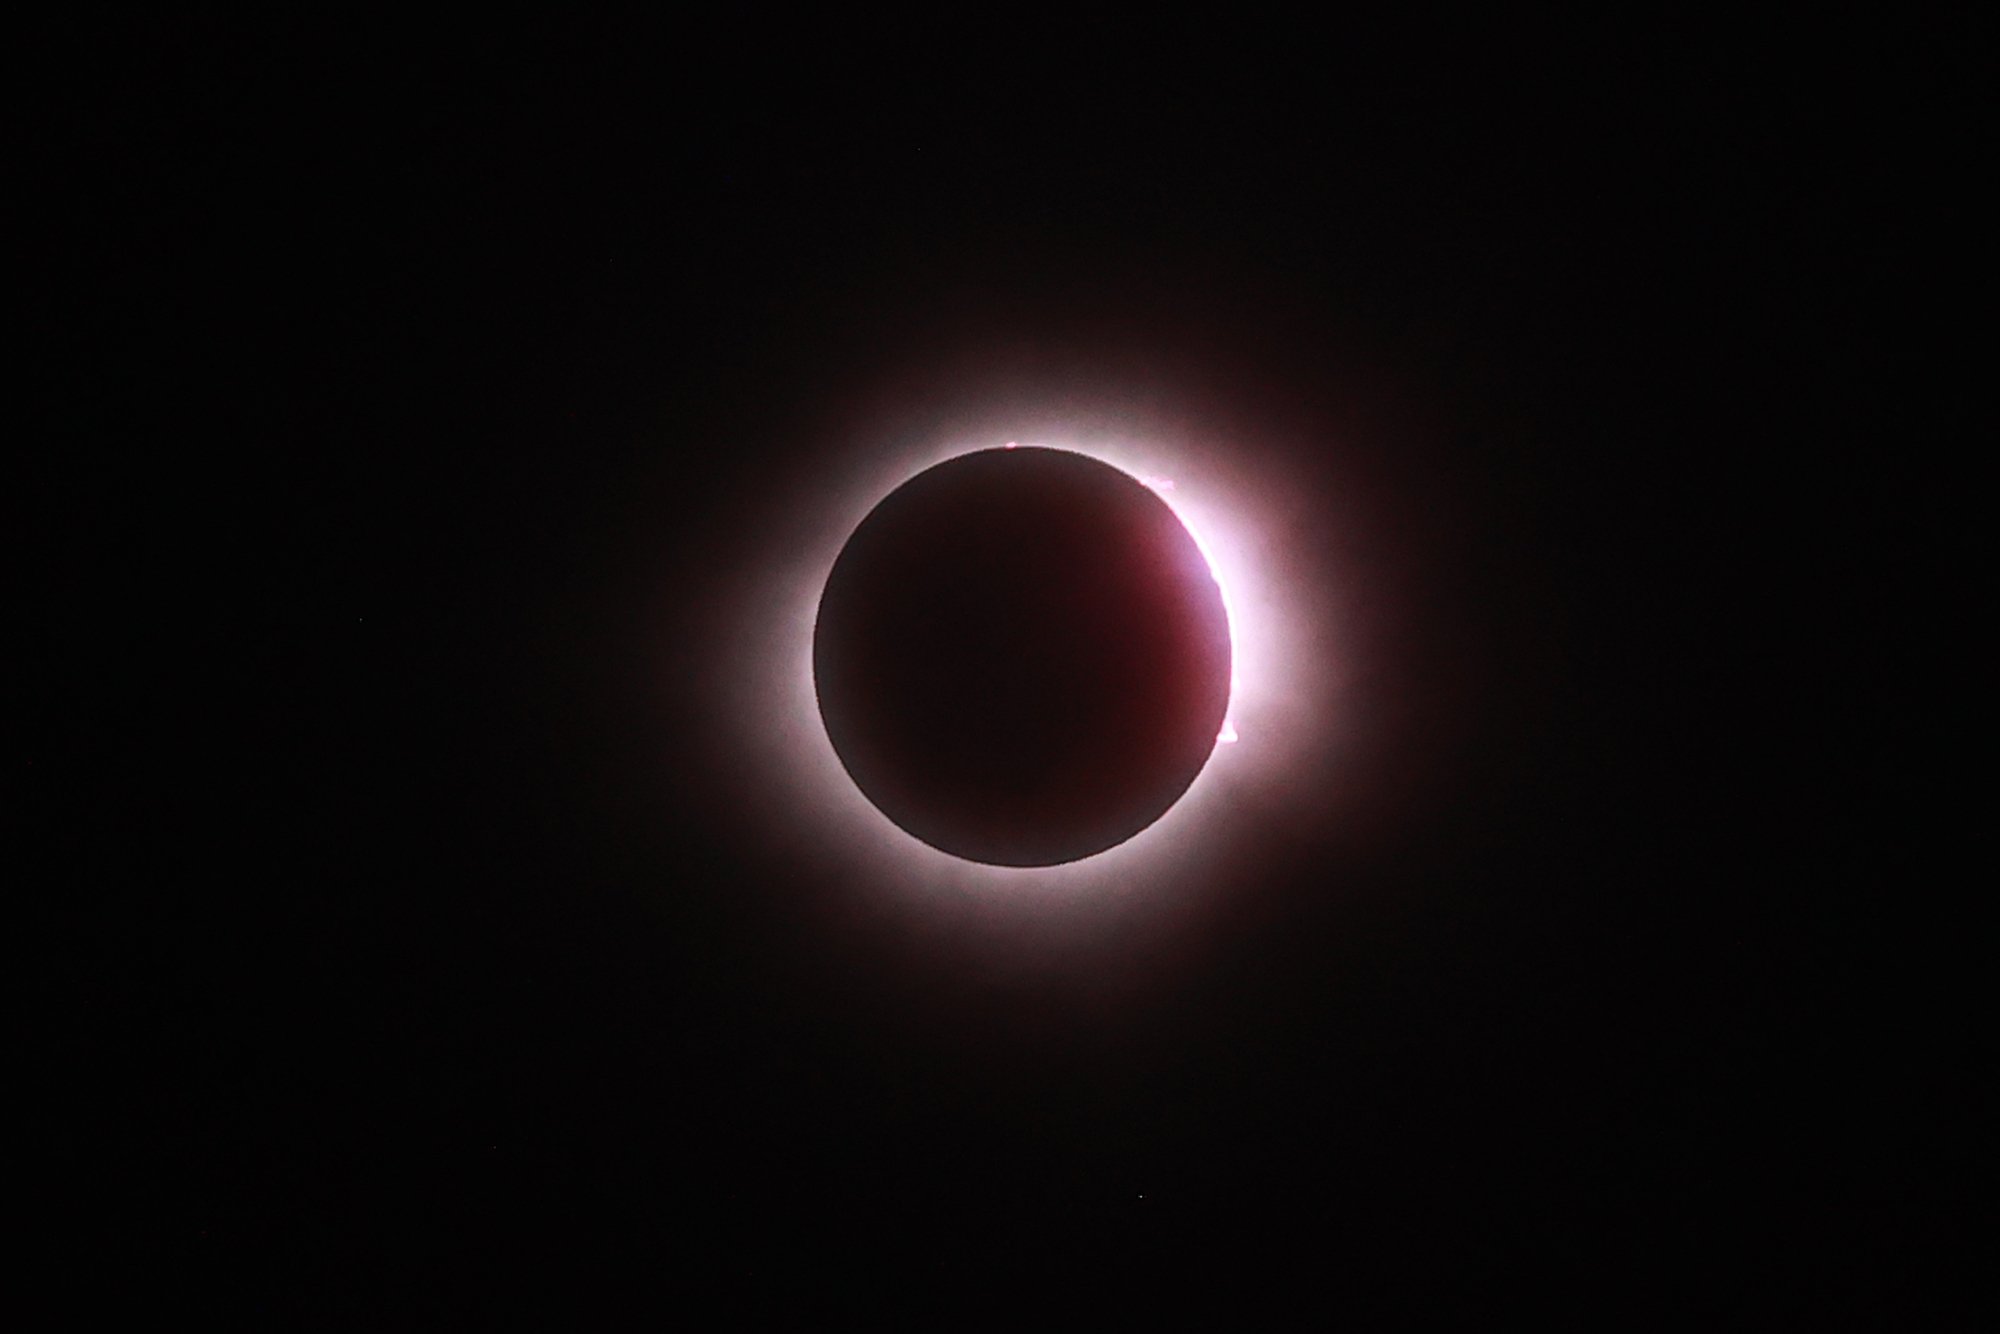 The sun fully disappears behind the moon during the solar eclipse on April 08, 2024 in Mazatlan, Mexico. The light behind the moon is bright and purple-ish..